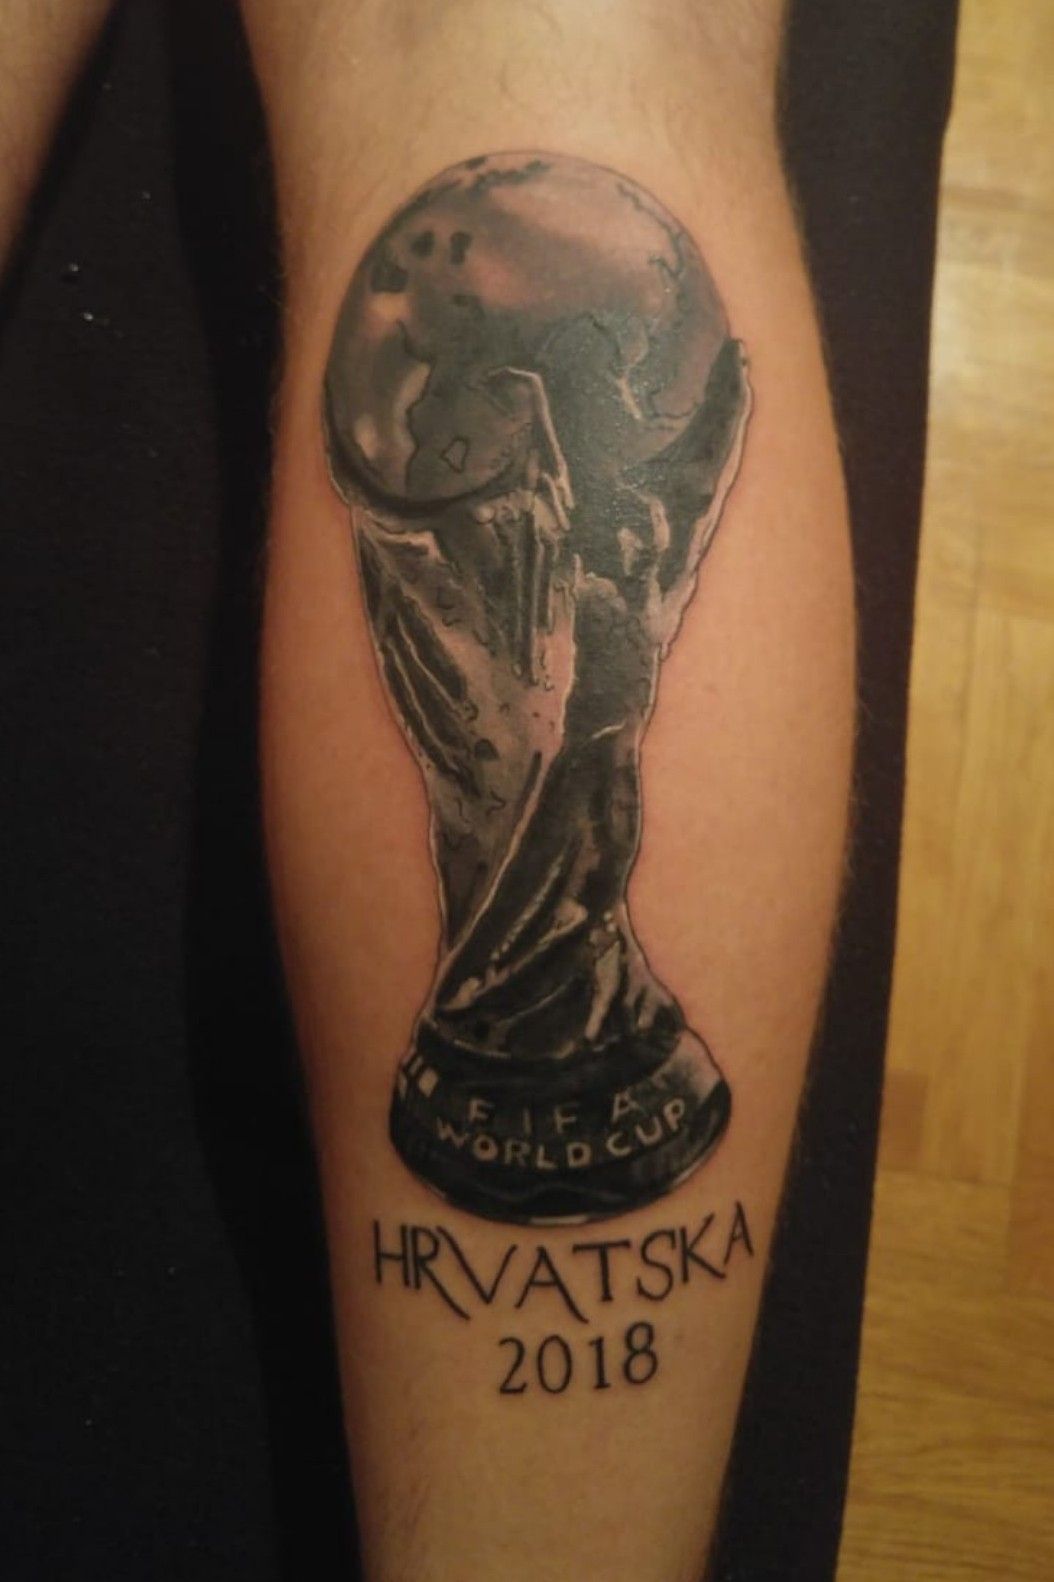 Argentines Have Tattoo Fever Following FIFA World Cup 2022 Triumph